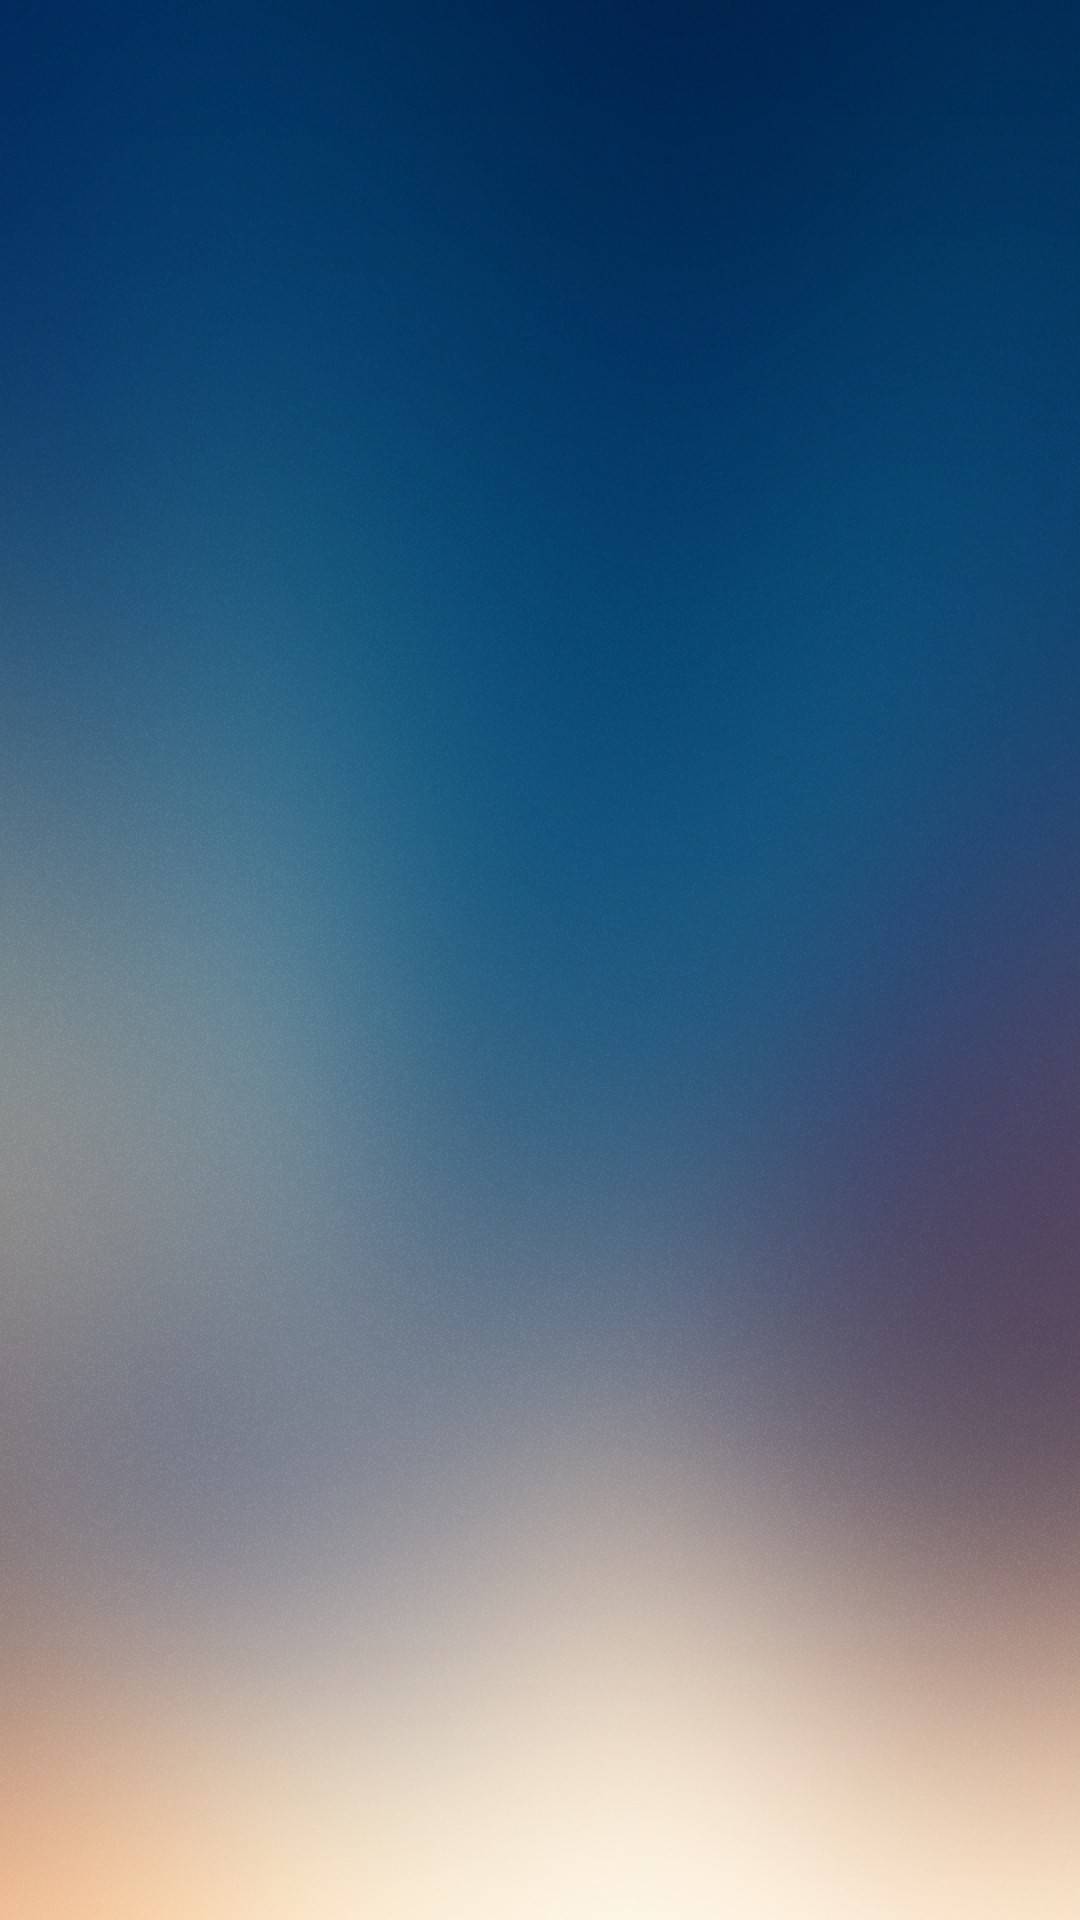 Ombre Iphone Wallpapers